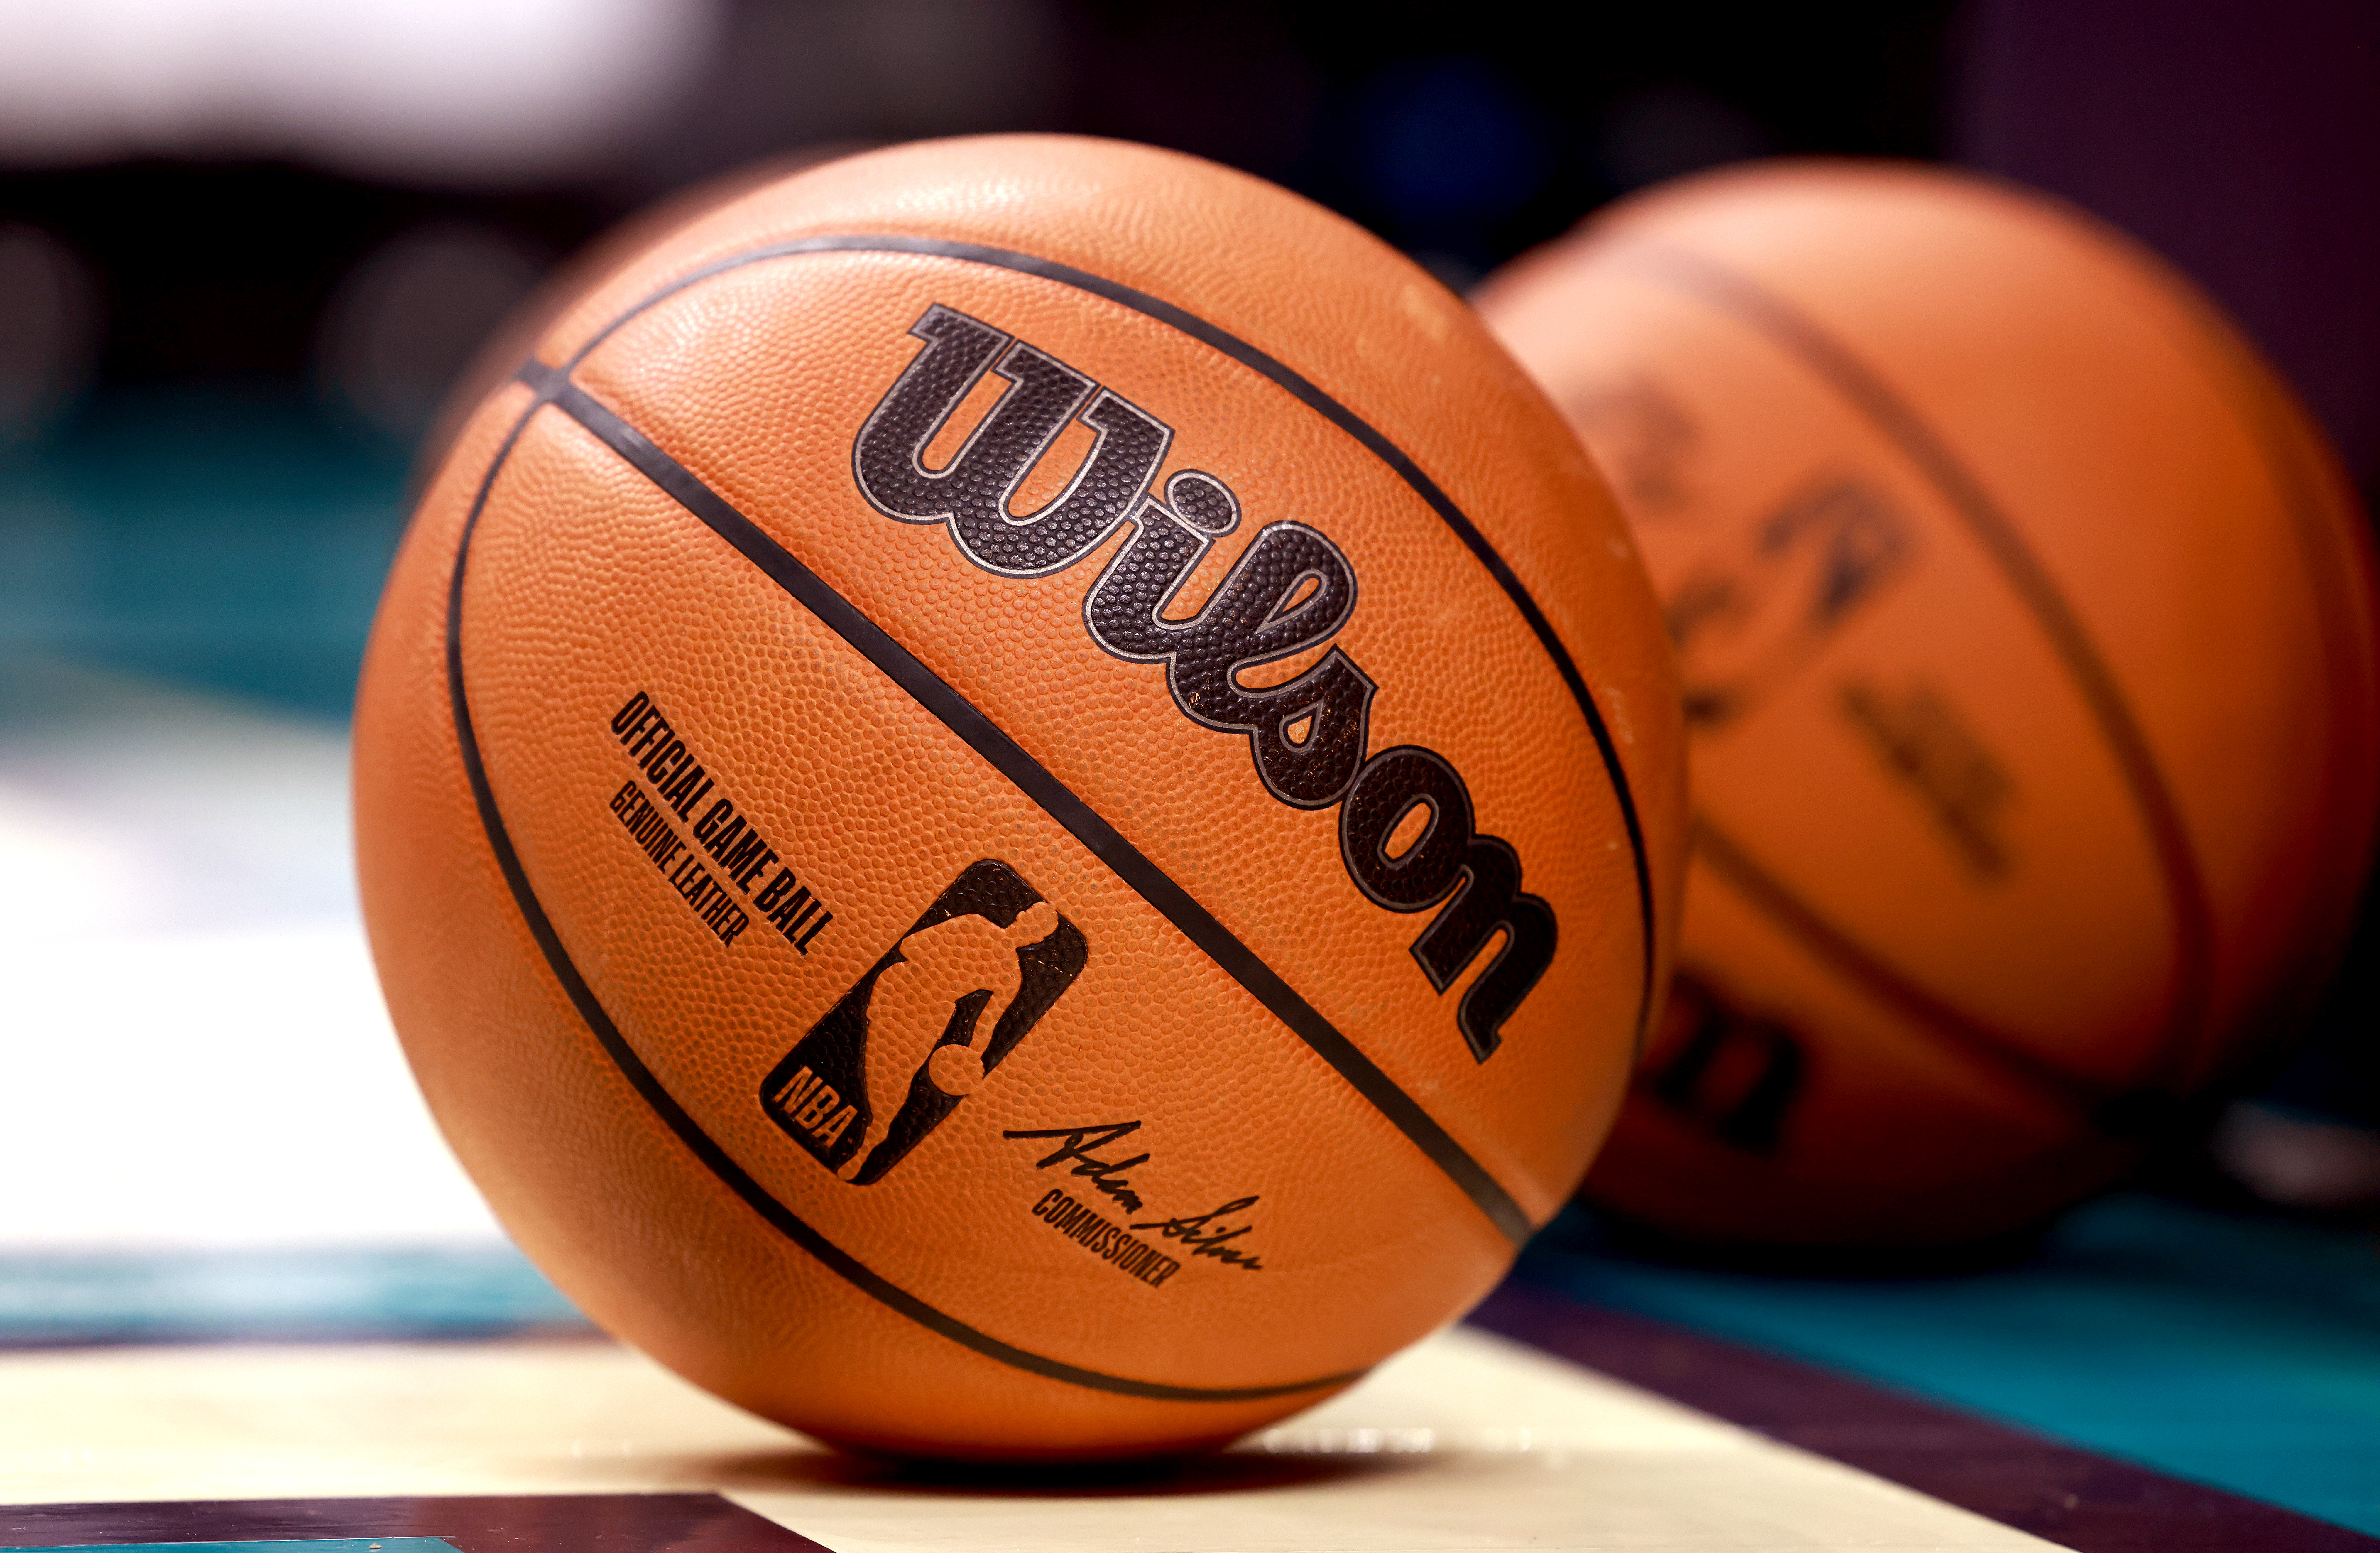 Wilson took over as the official manufacturer of NBA game balls this season and some players are blaming the league's poor shooting numbers on the new rock